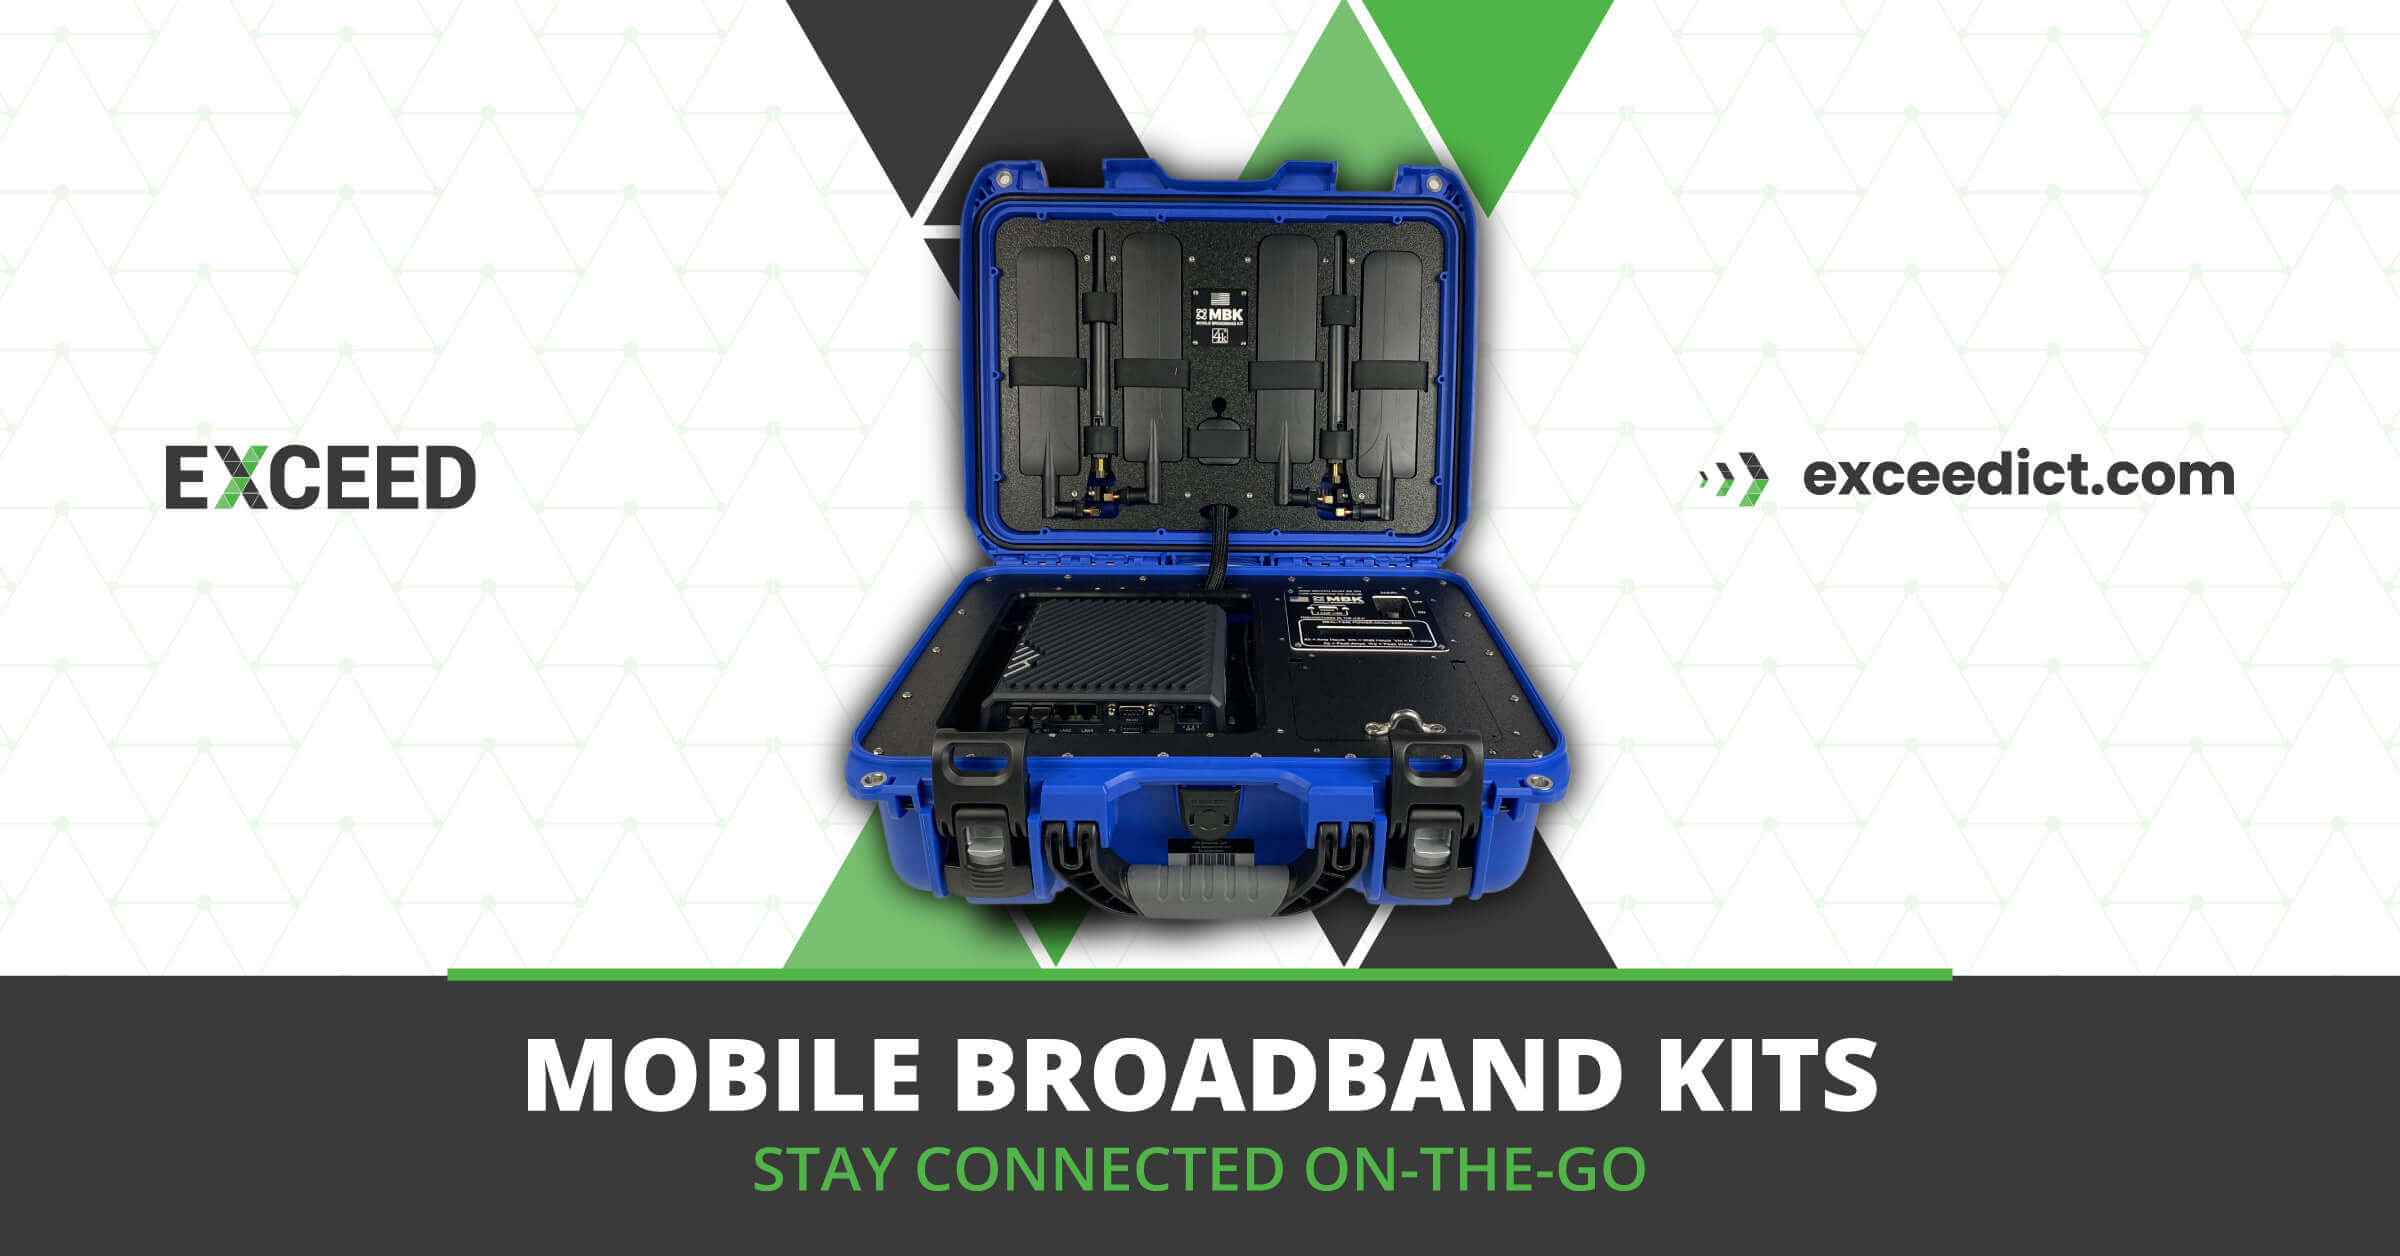 Mobile Broadband Kits: Stay Connected On-The-Go